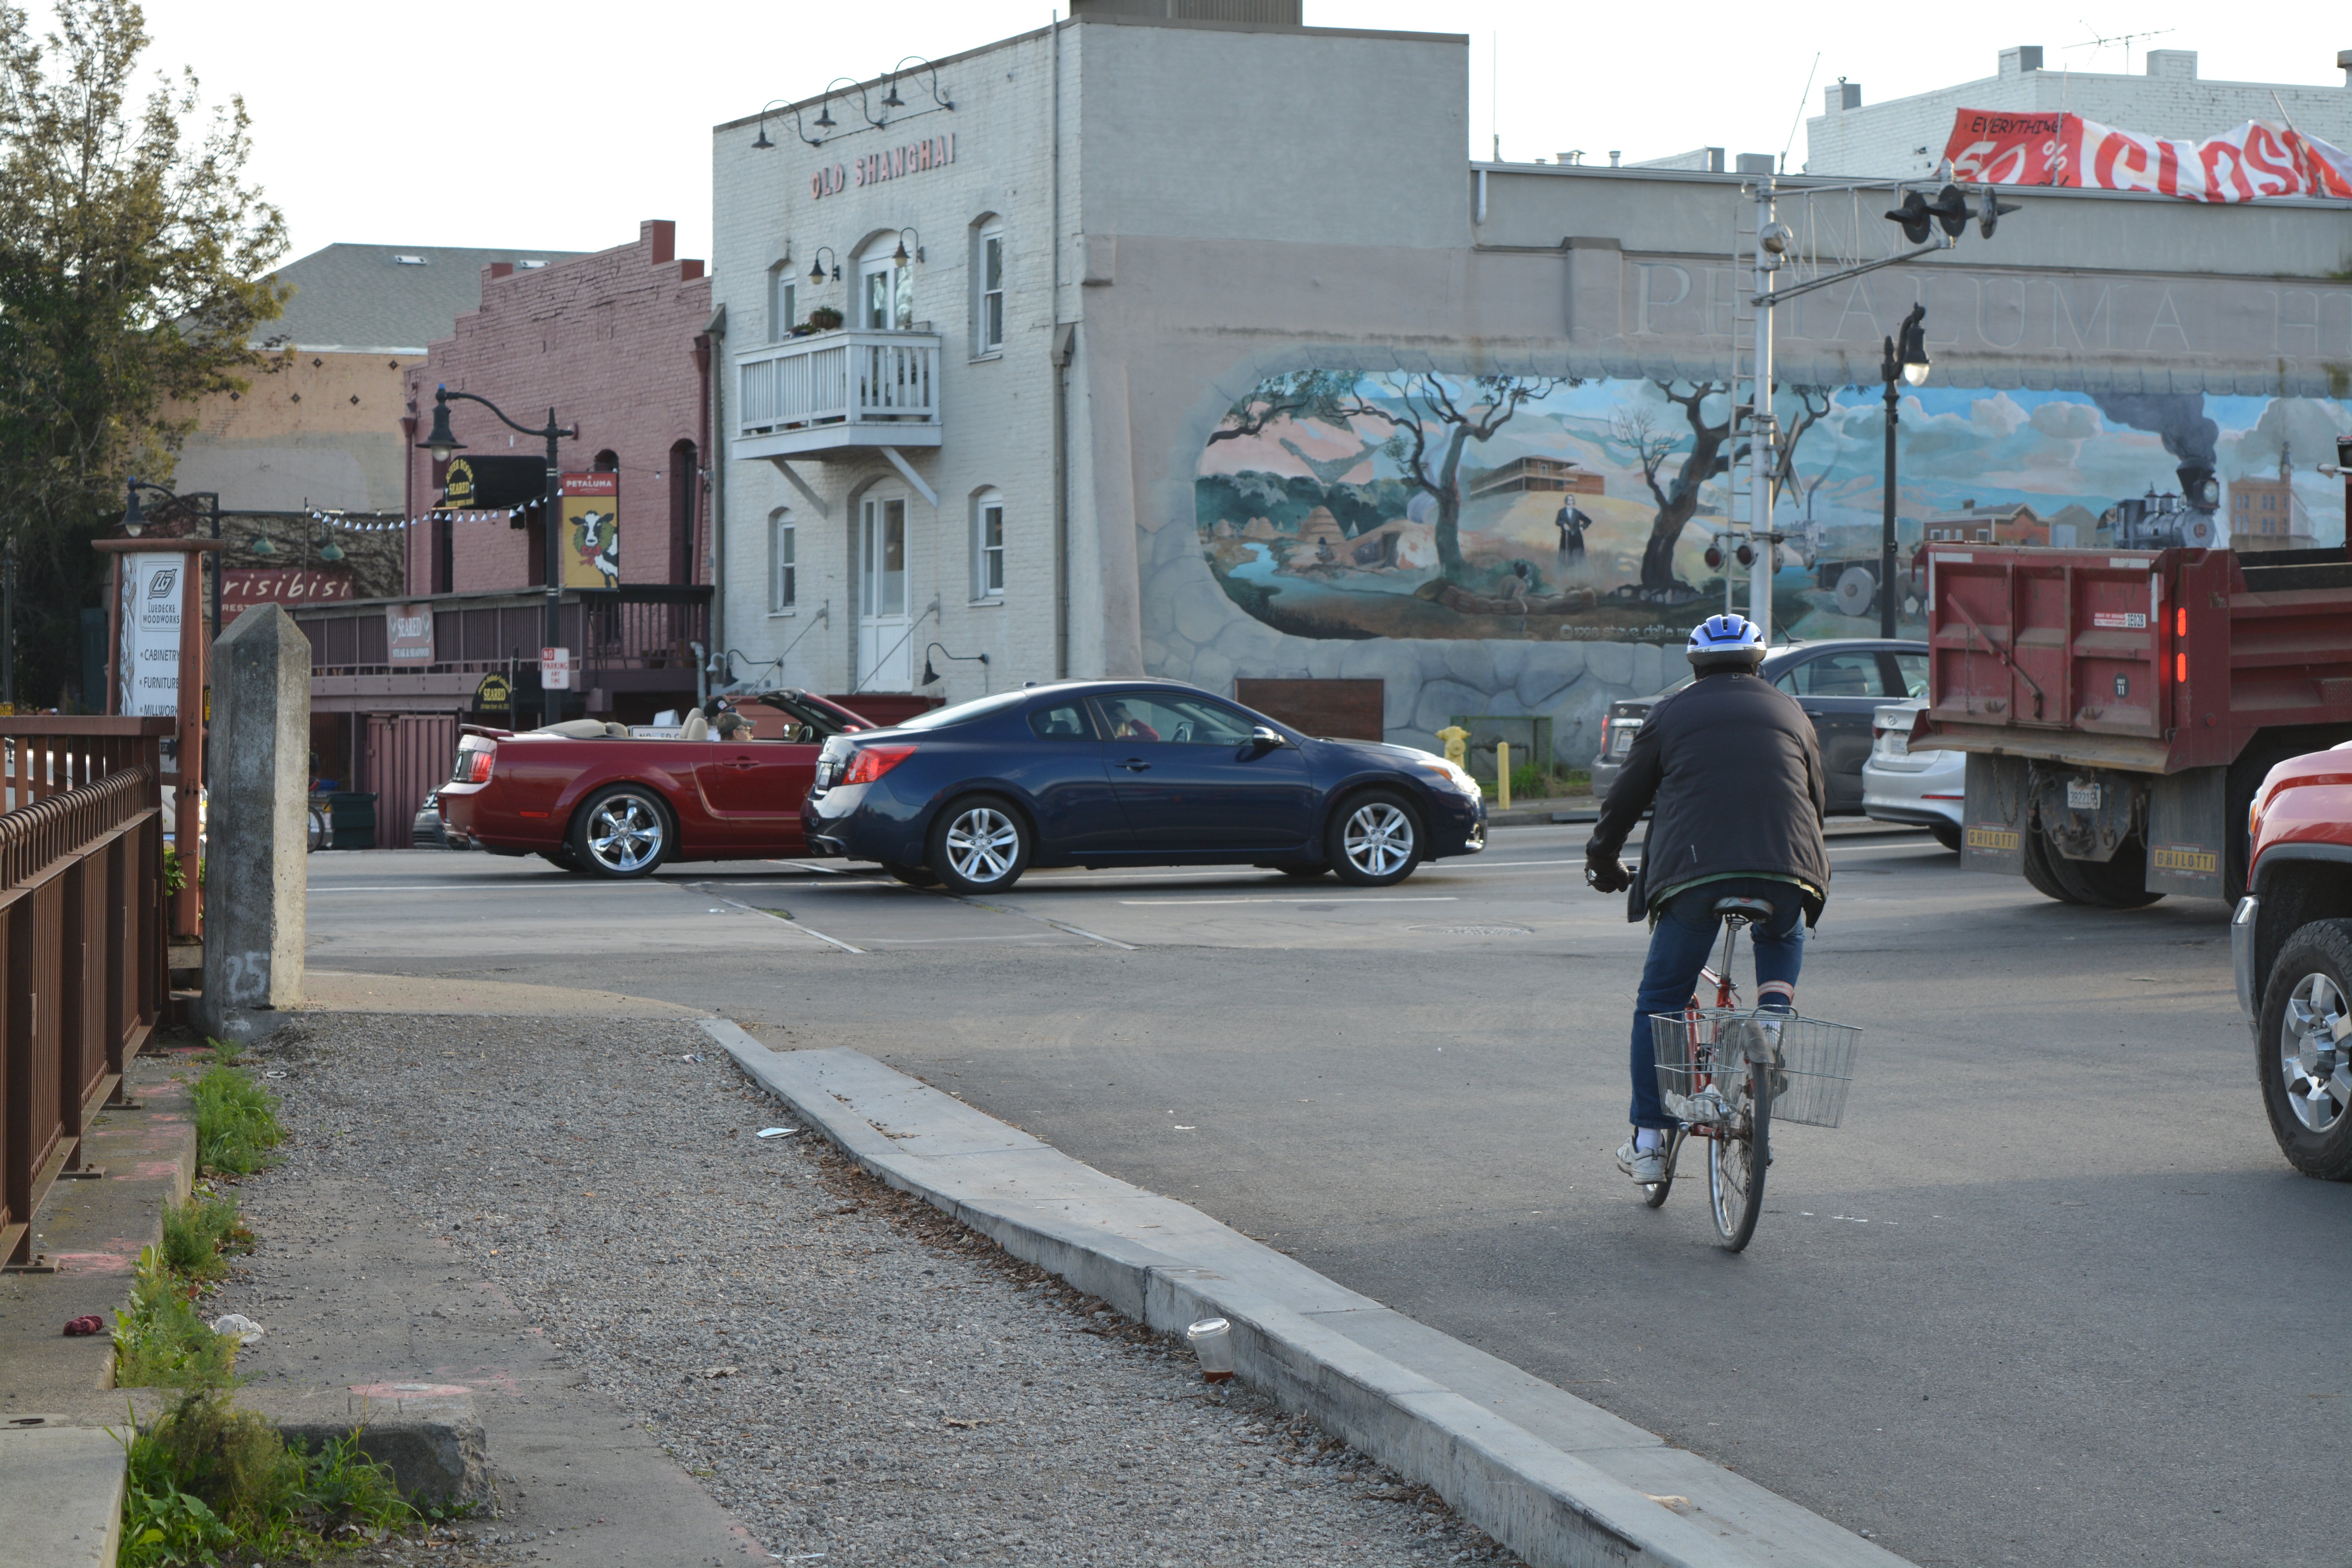 Authorities hope residents of Petaluma, which has a largely flat geography, will adopt more sustainable modes of transportation like biking.